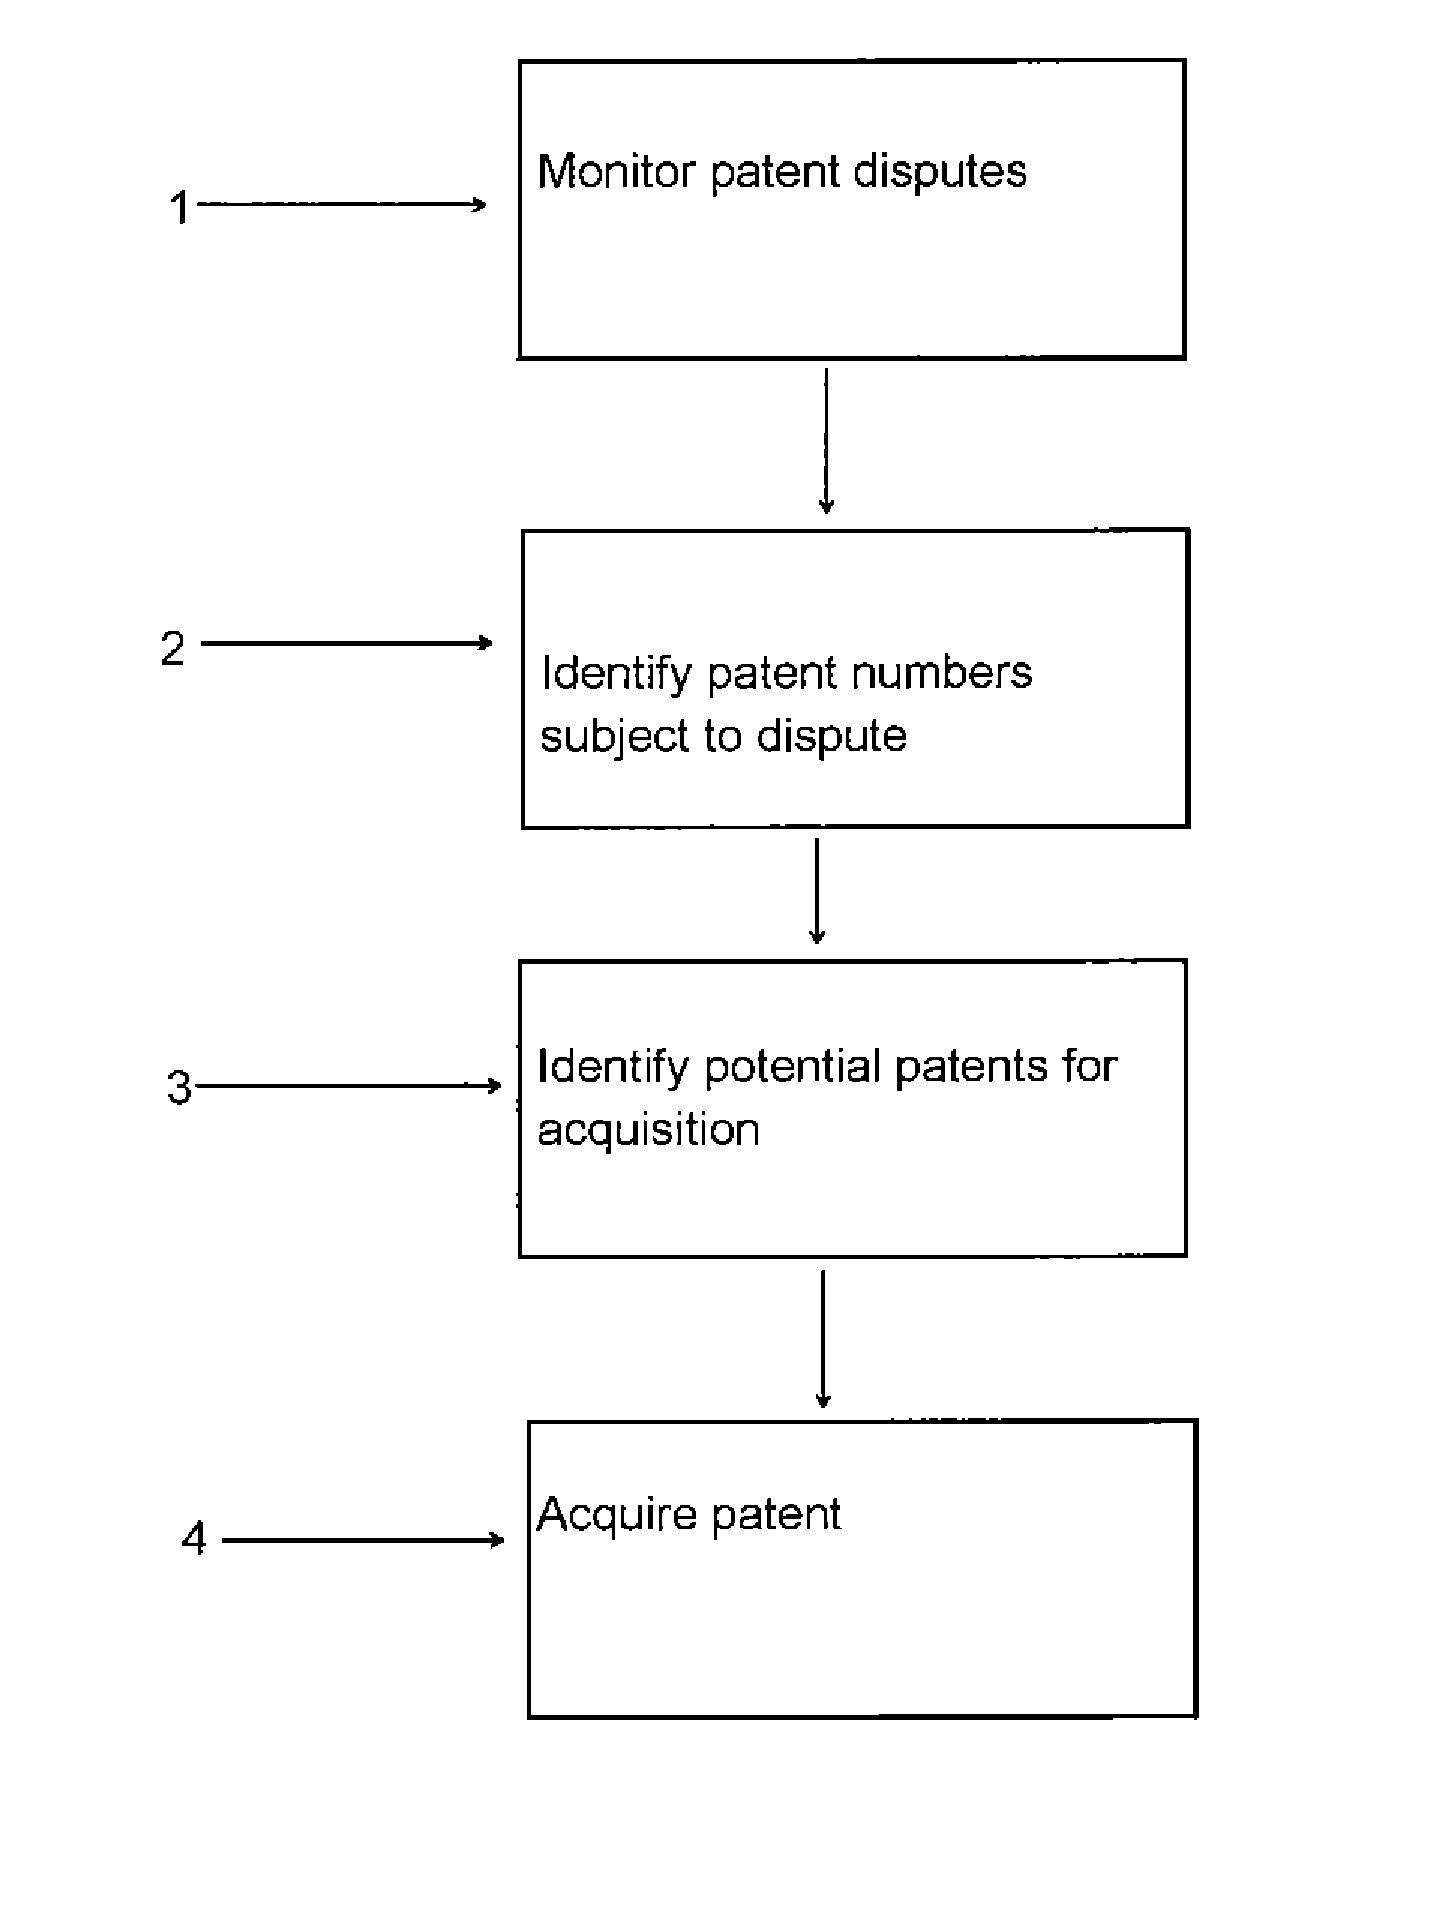 Systems, Methods and Computer Program Products for Identifying a Potentially Valuable Patent for Acquisition